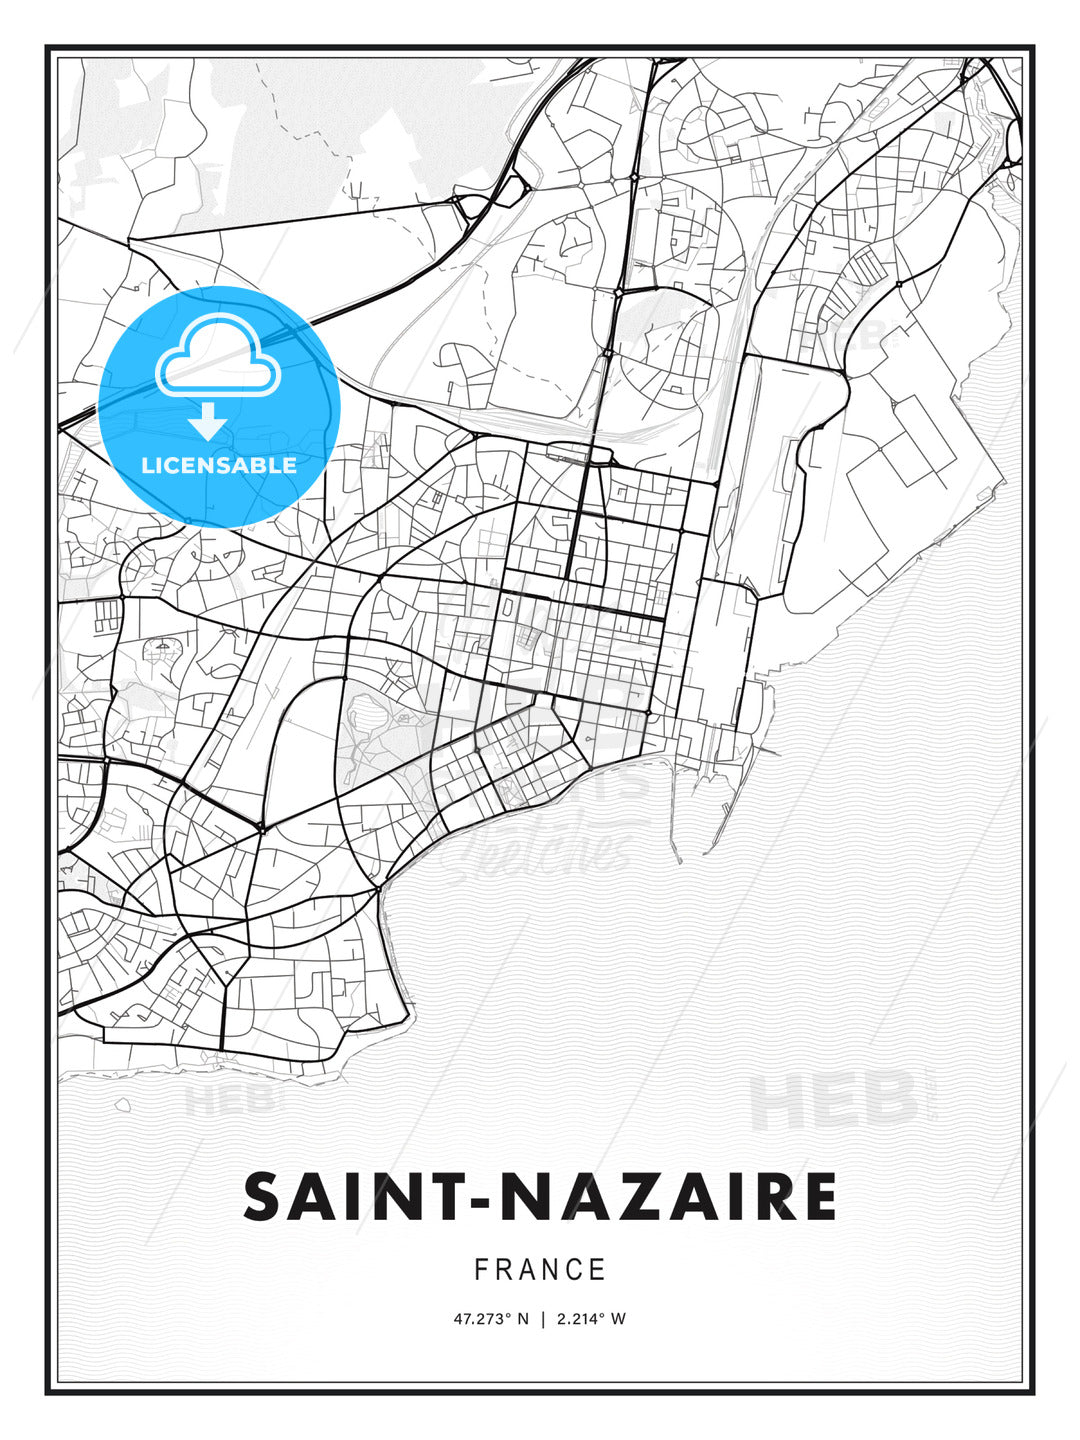 Saint-Nazaire, France, Modern Print Template in Various Formats - HEBSTREITS Sketches